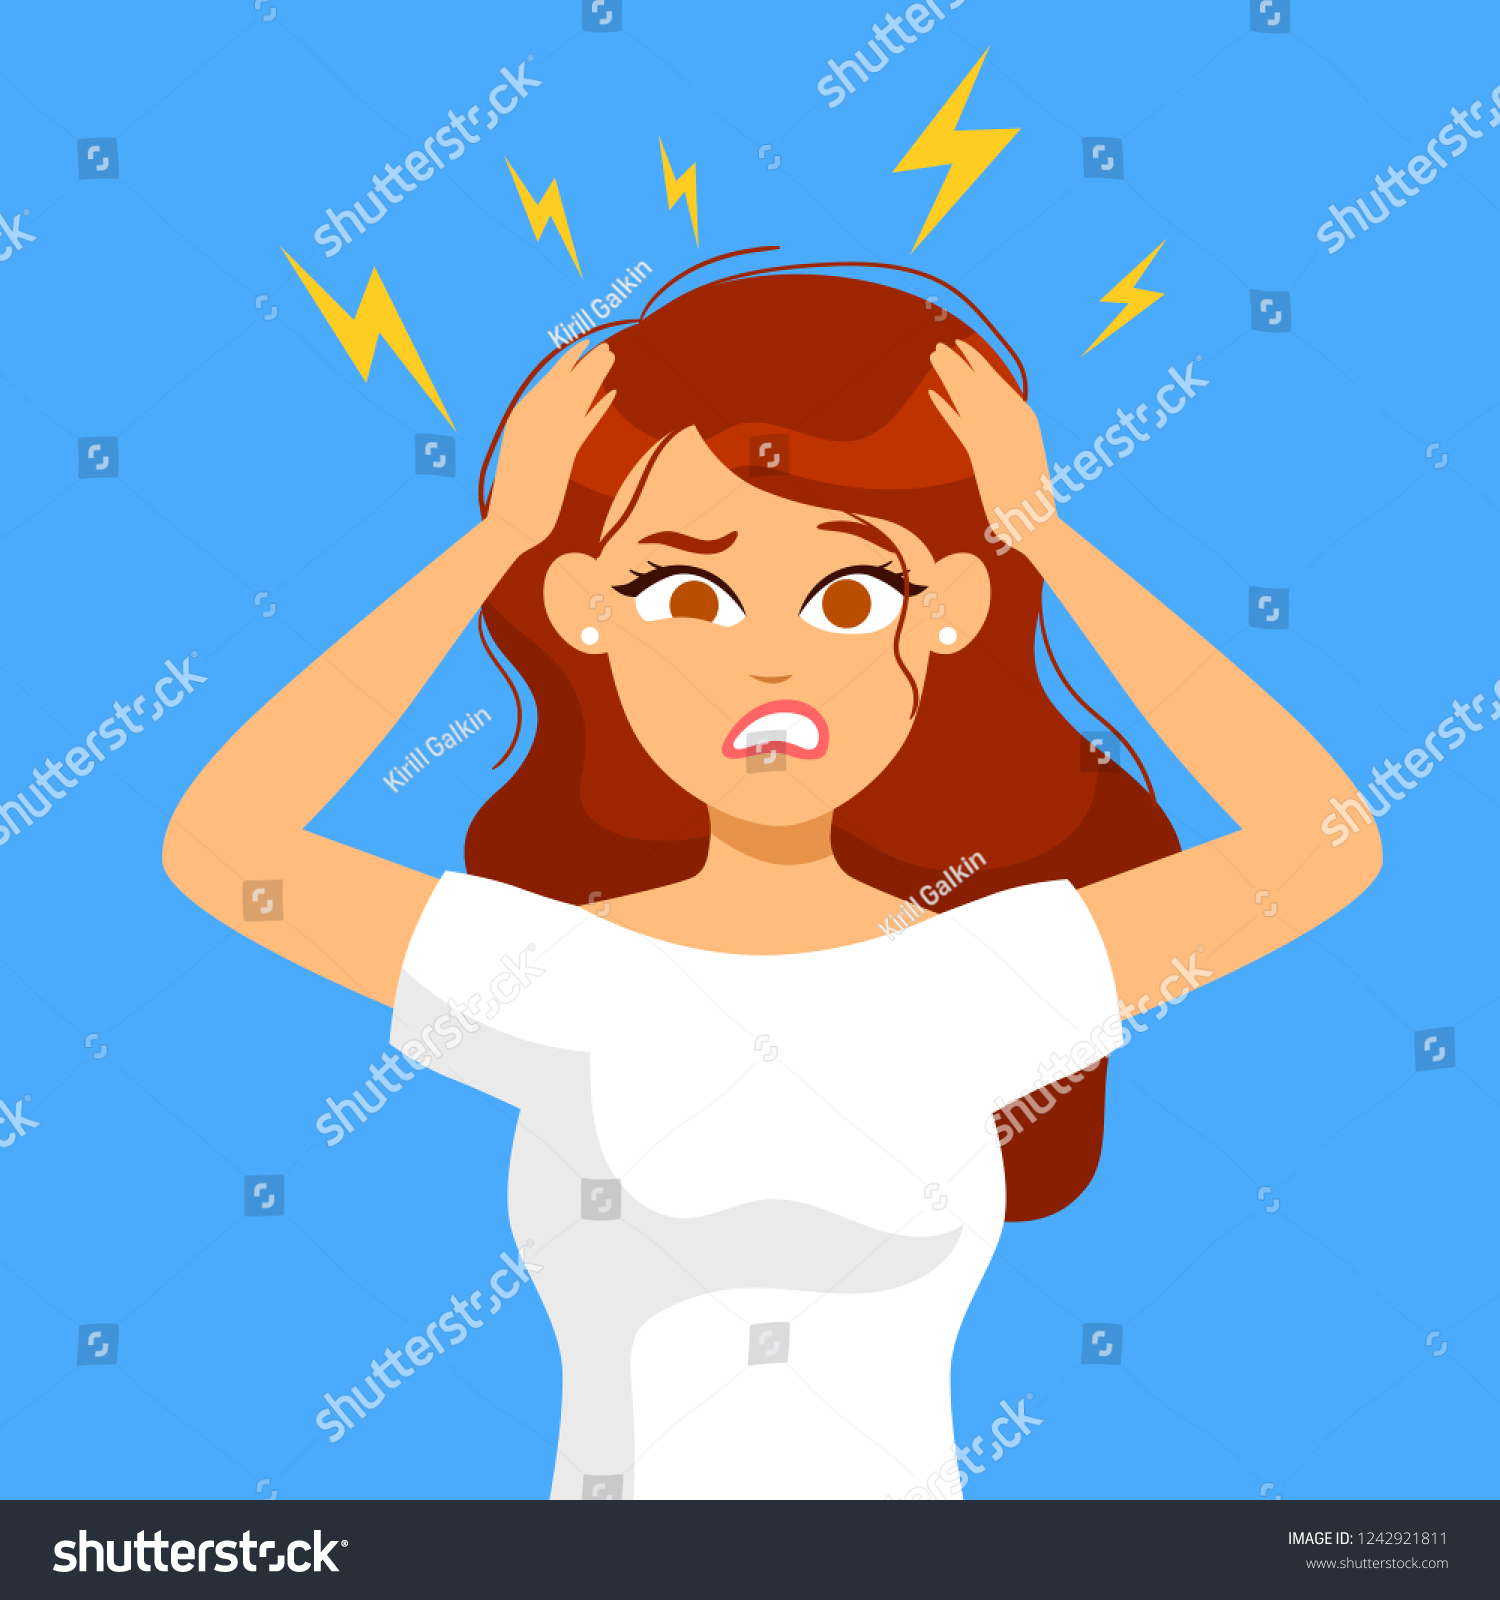 Stressed Cartoon Business Woman Office Work Stock Vector Royalty Free